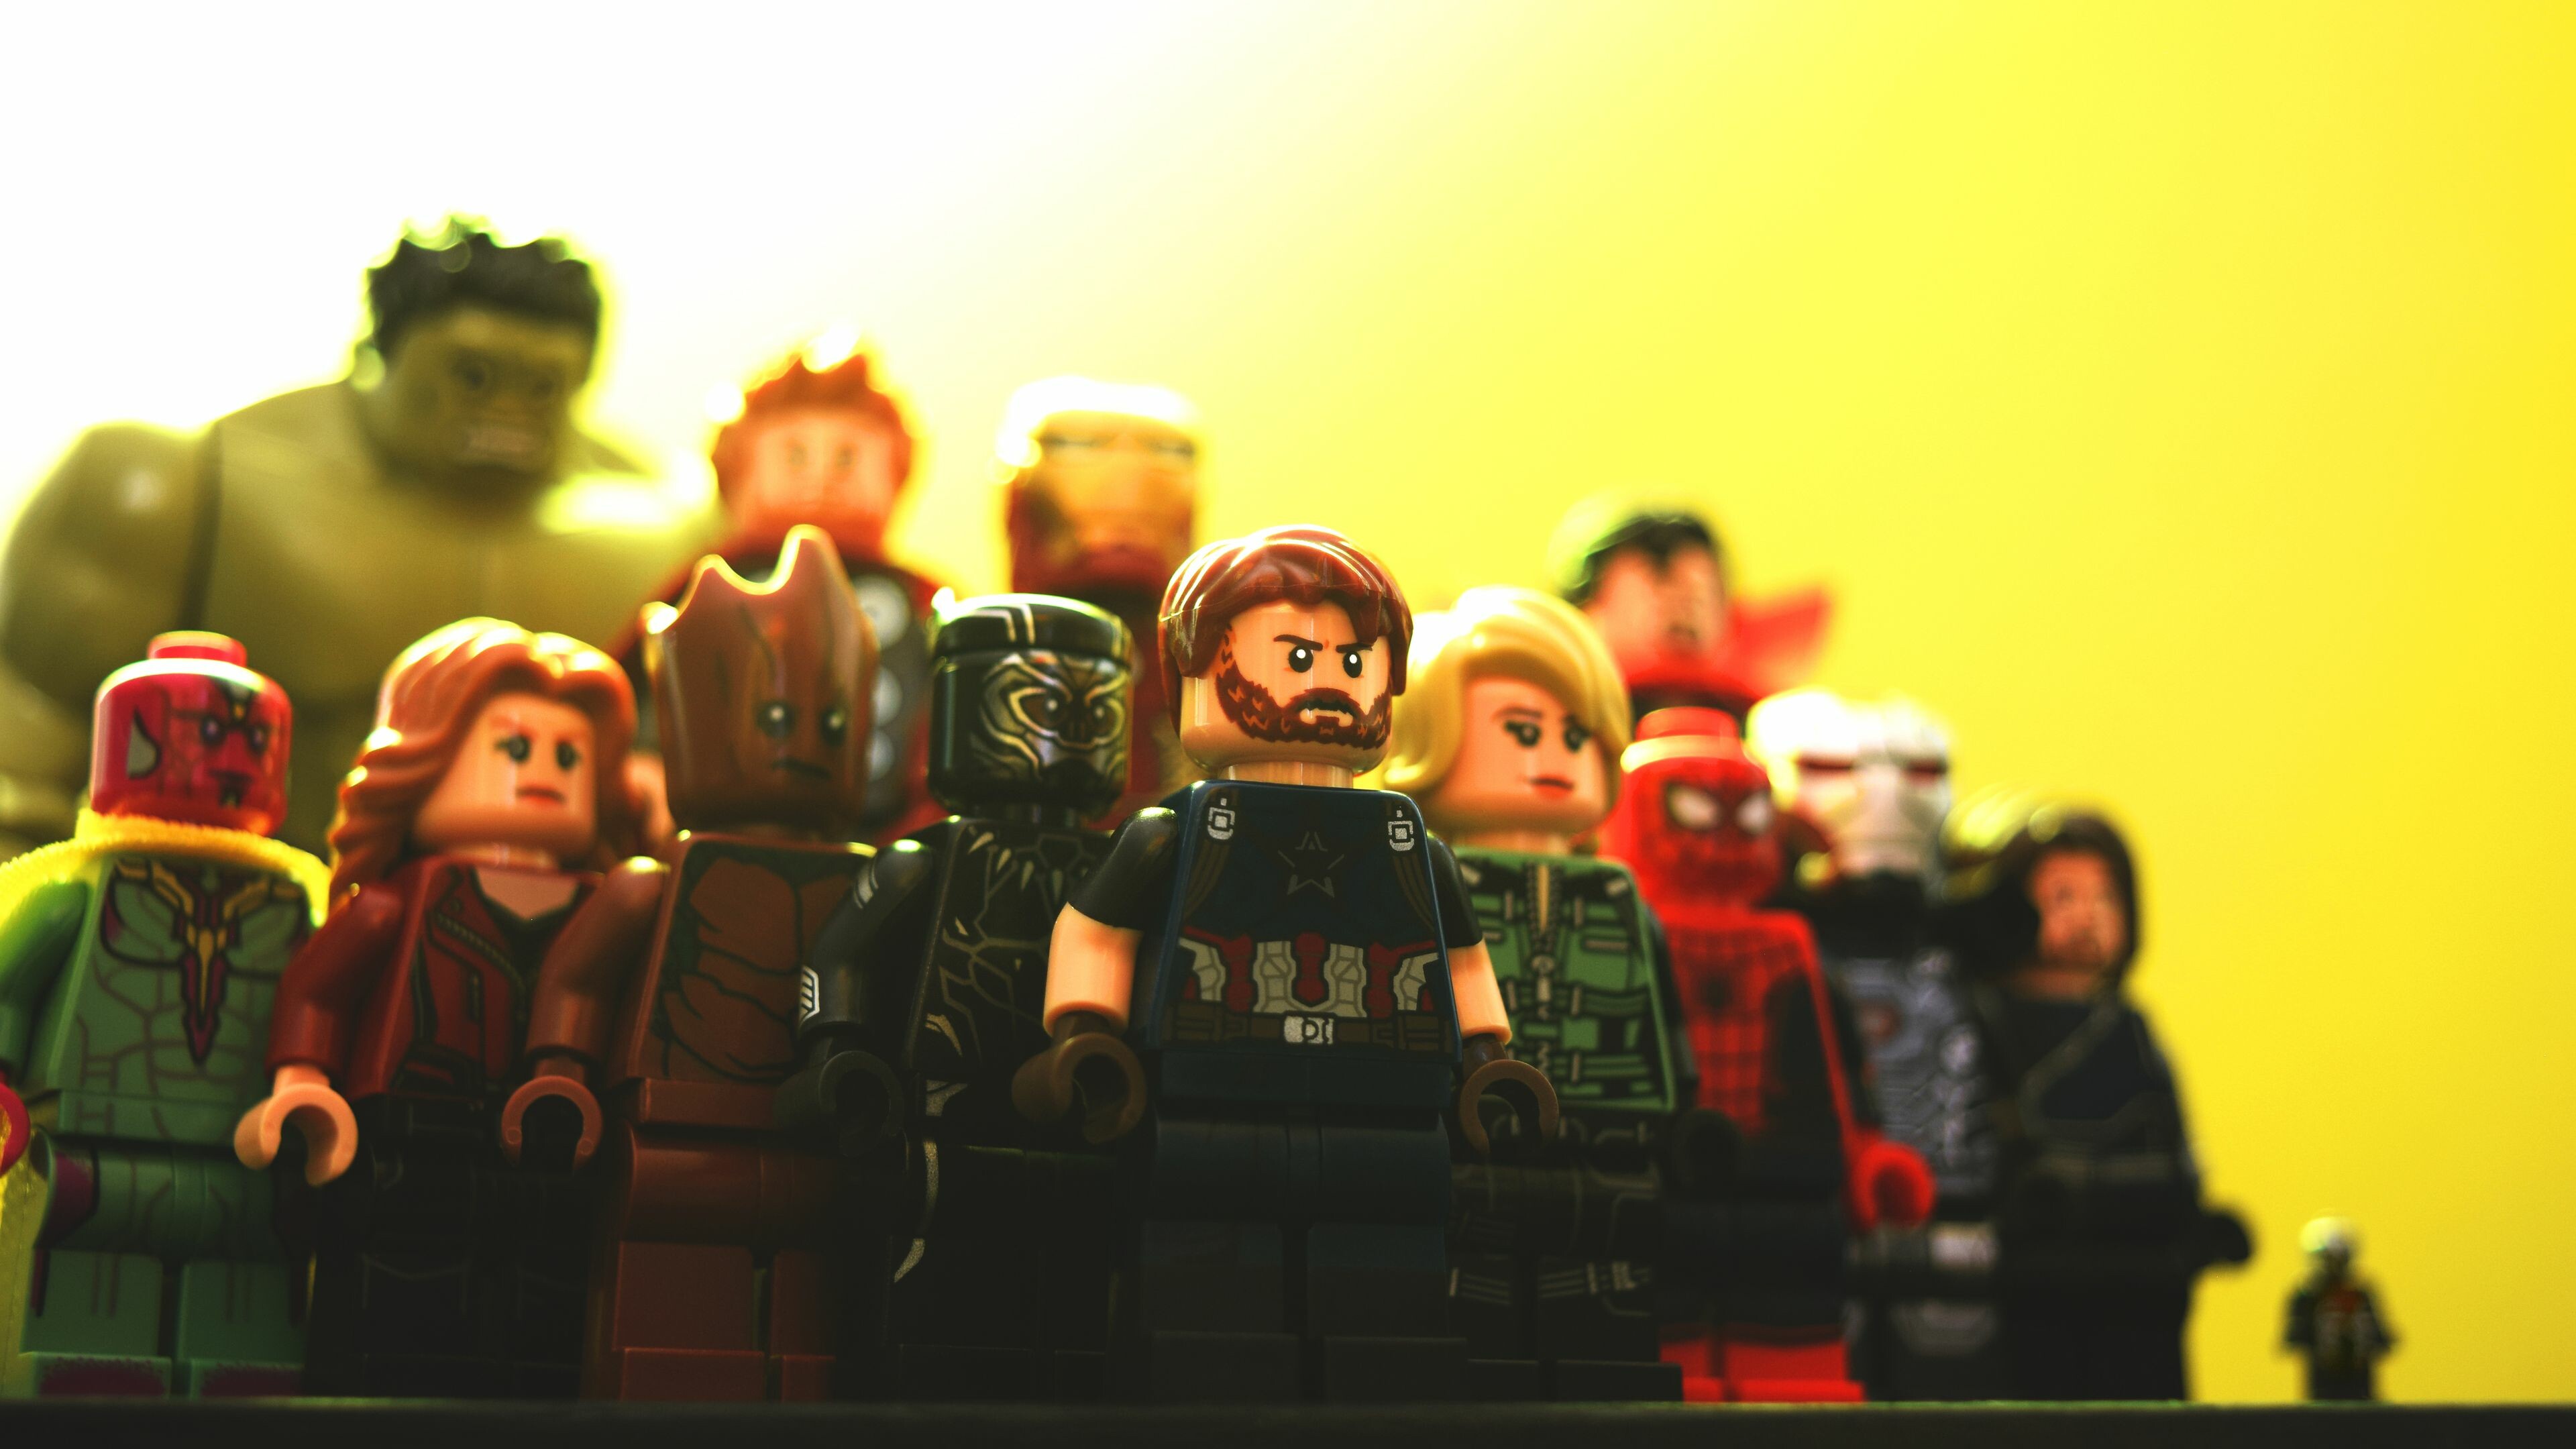 Lego: One of the most popular toys in the world, The Avengers. 3840x2160 4K Wallpaper.